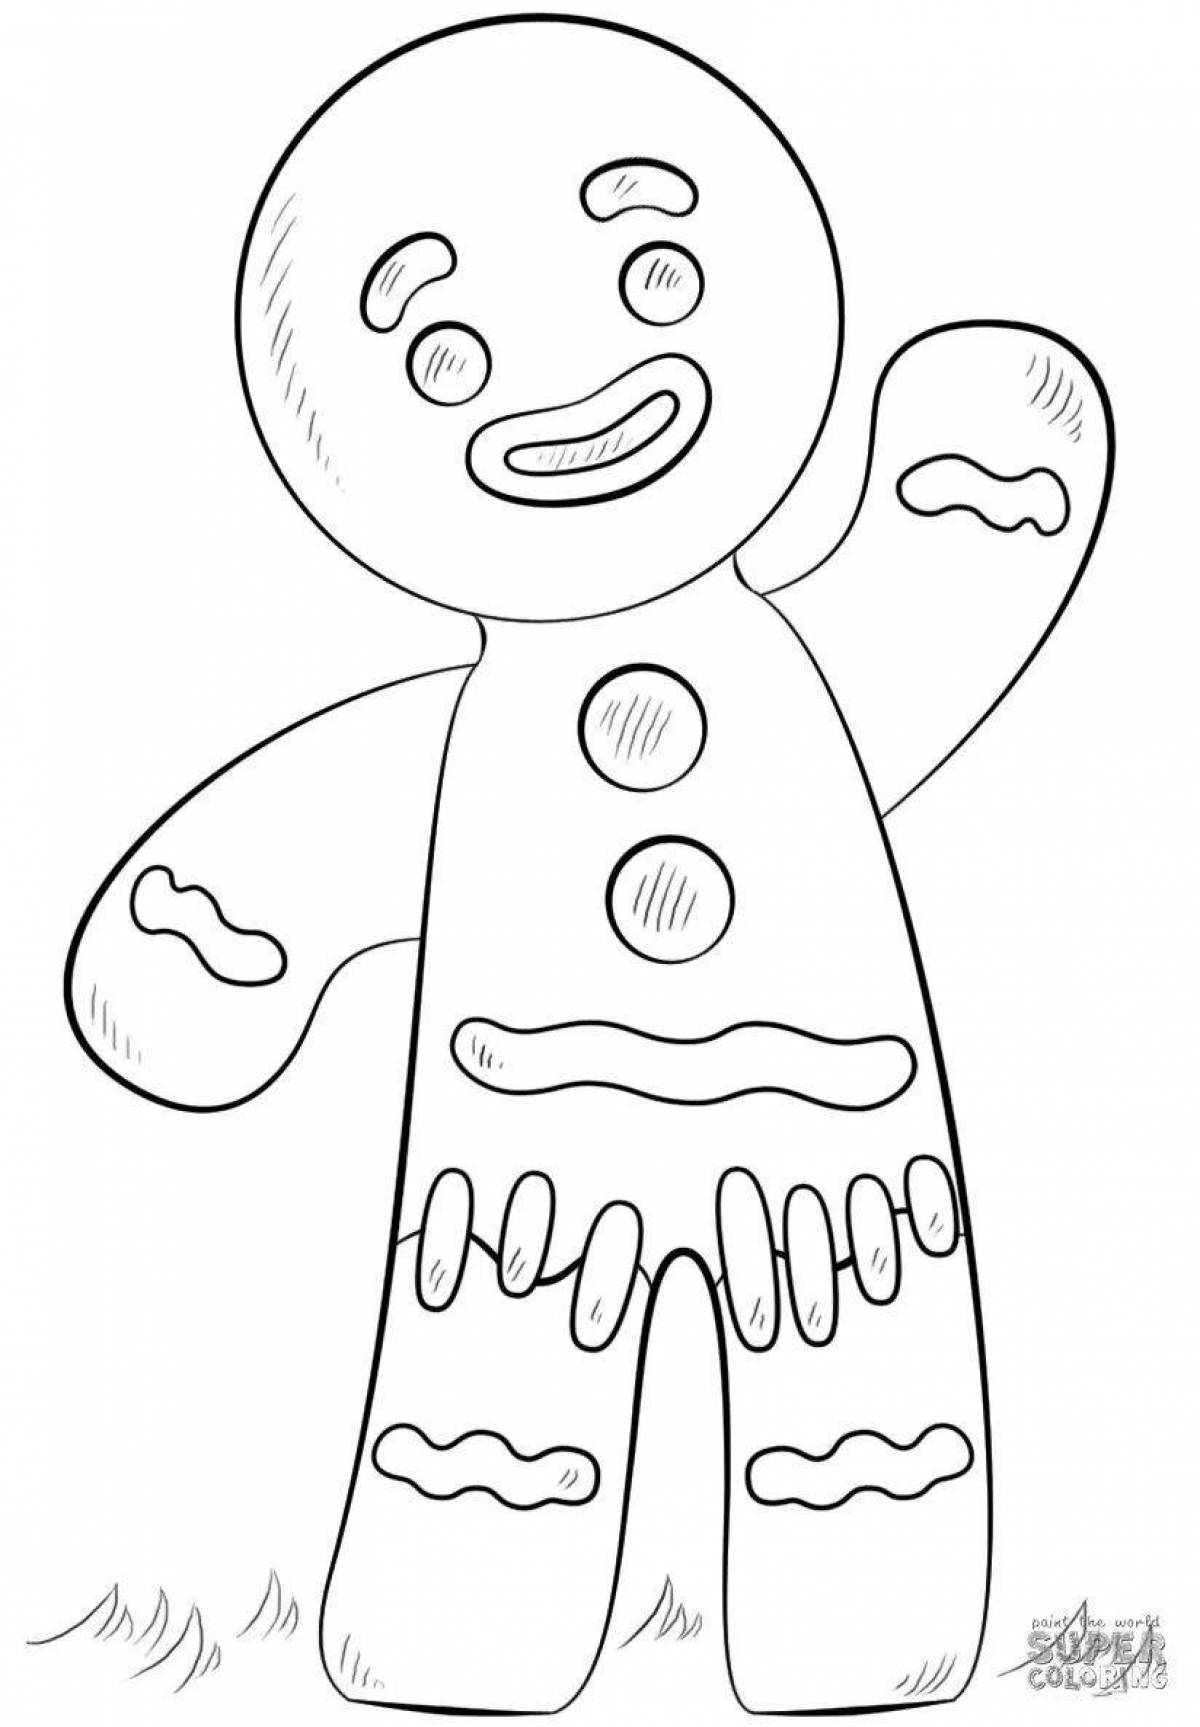 Coloring page of a cheerful gingerbread man